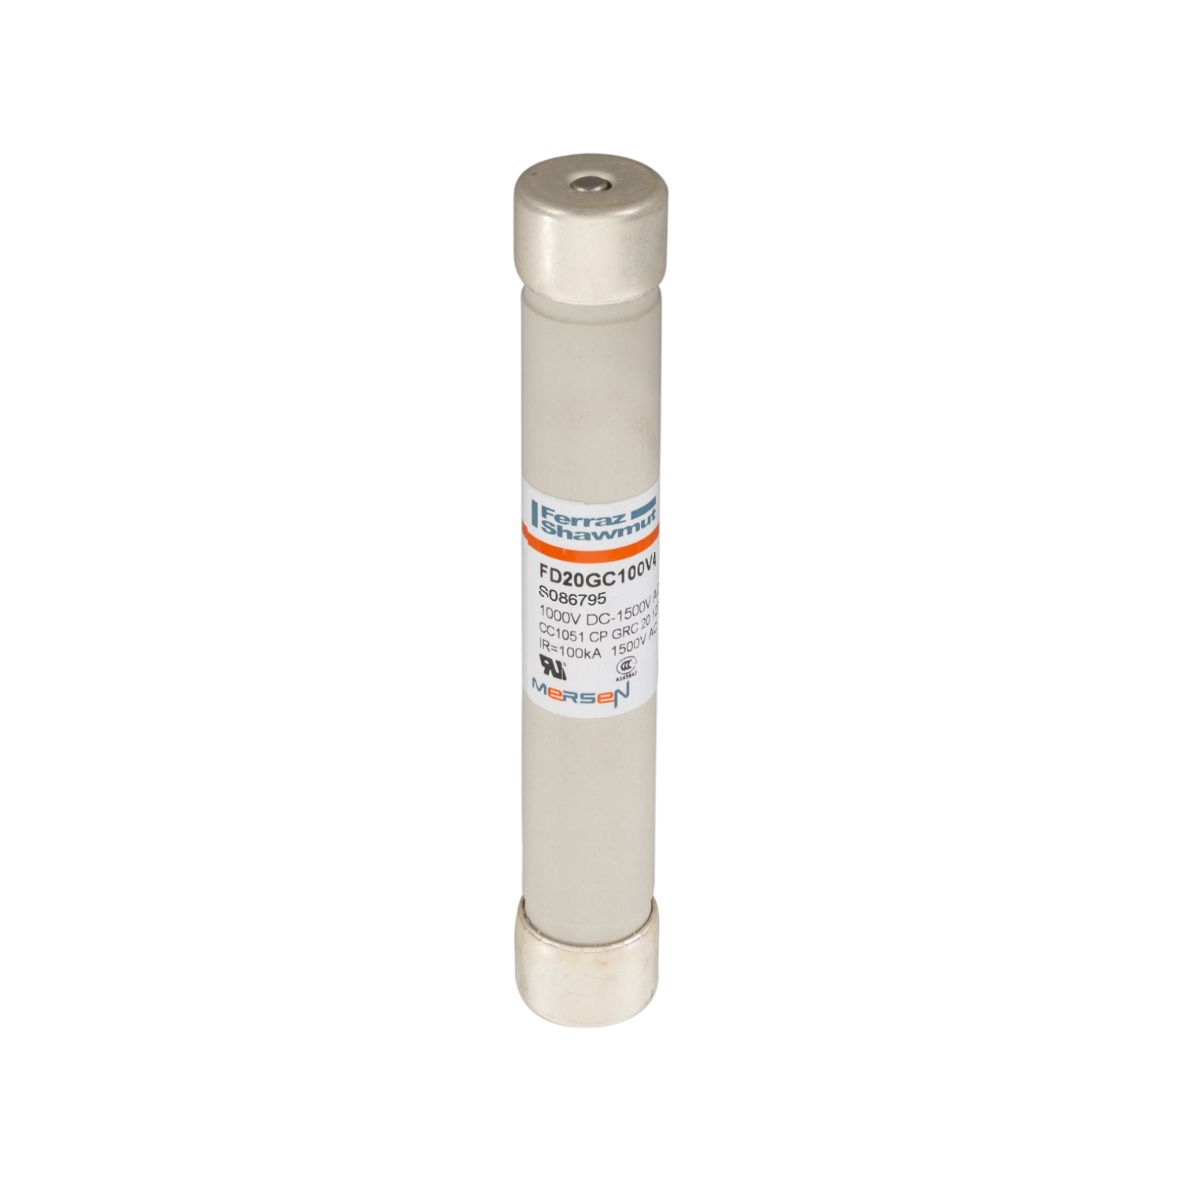 S086795 - Cylindrical fuse-link GRC 1000VDC 20x127, 40A with striker